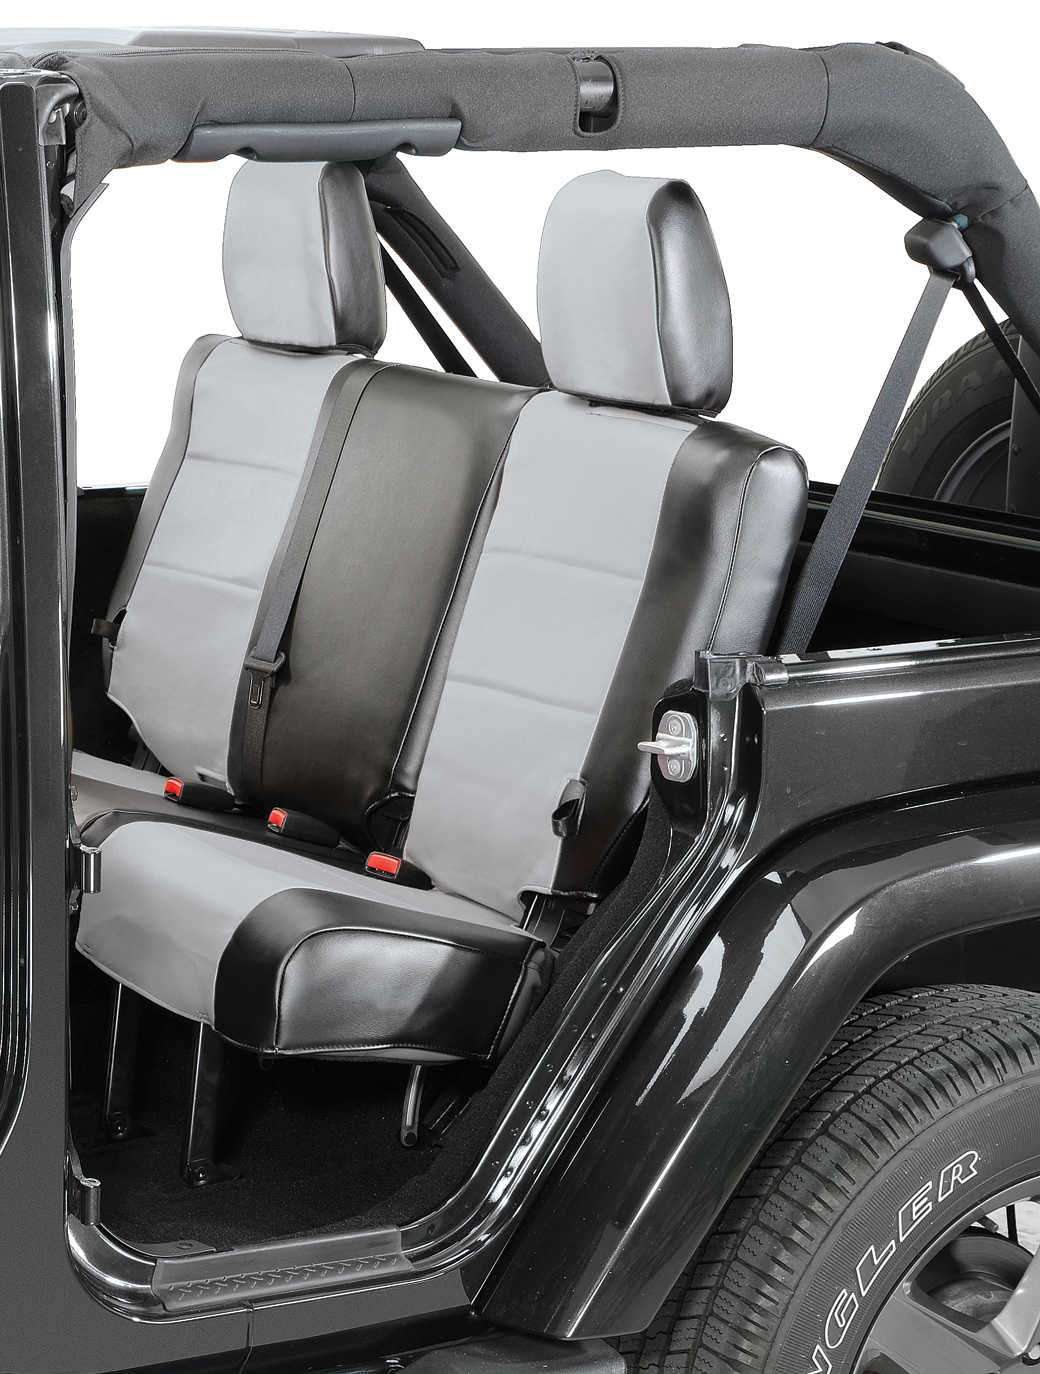 41 HQ Pictures Jeep Wrangler Sport Seat Covers - Neoprene Seat Vest Covers Fits: Jeep Wrangler JK 2007-16 ...